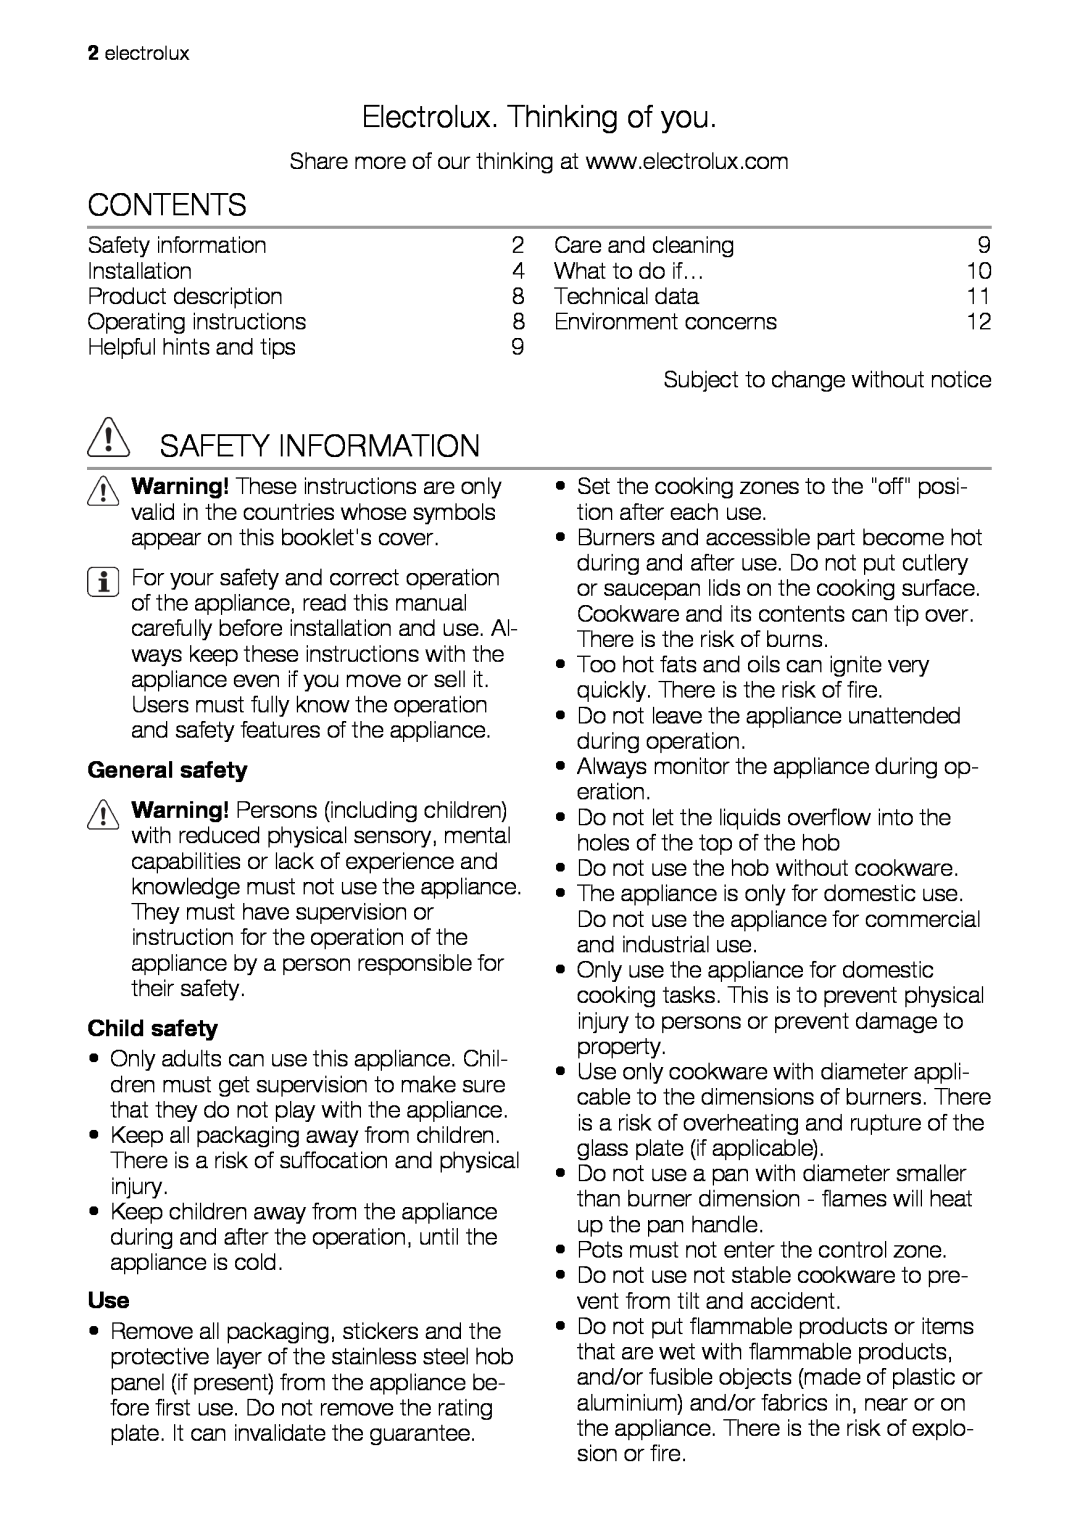 Electrolux EHG60412 user manual Electrolux. Thinking of you, Contents, Safety Information, General safety, Child safety 